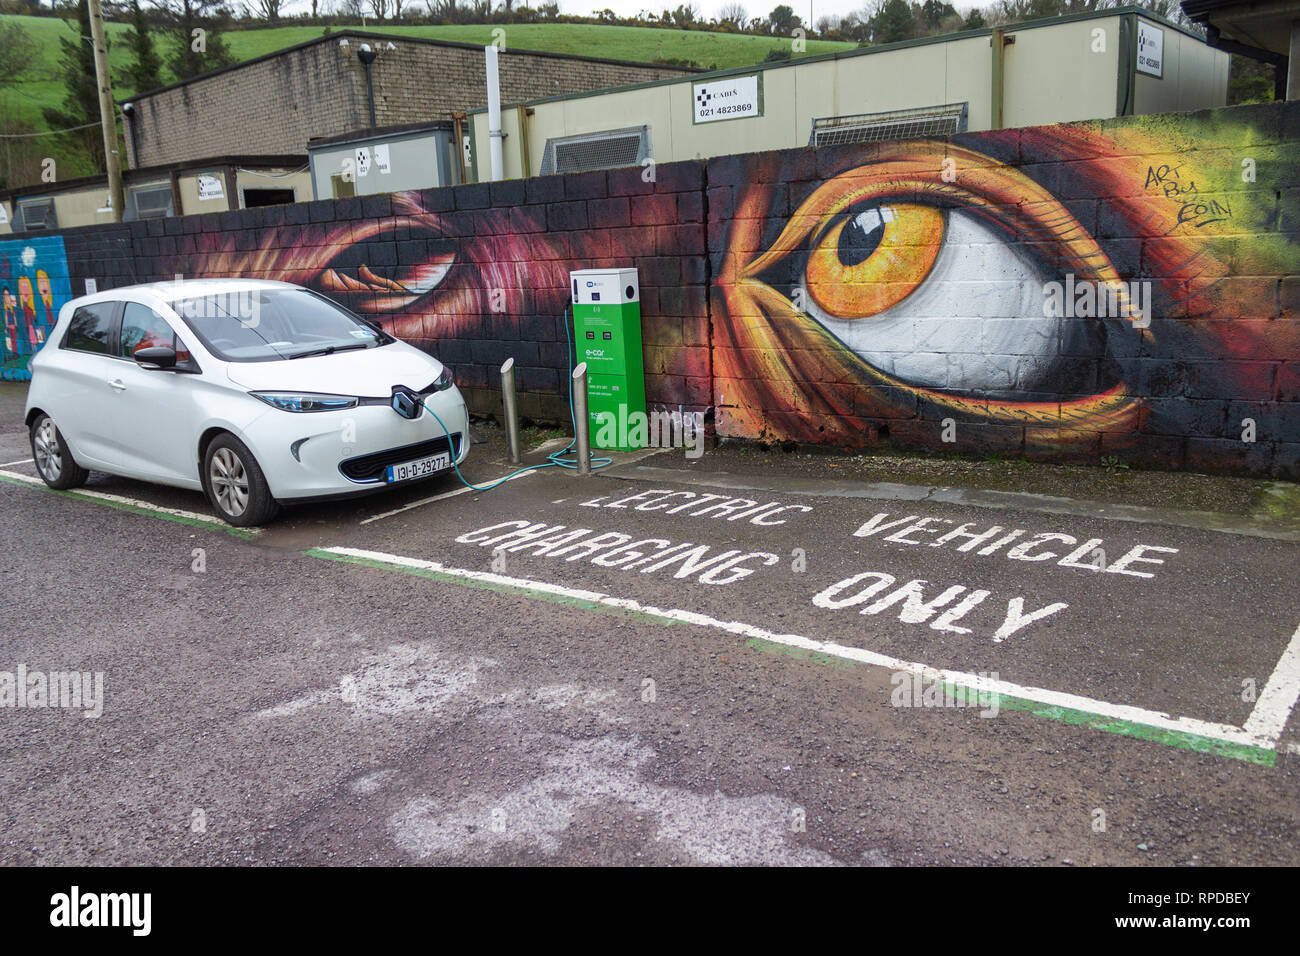 Electric car being charged at an electric car charging point bantry west cork ireland Stock Photo